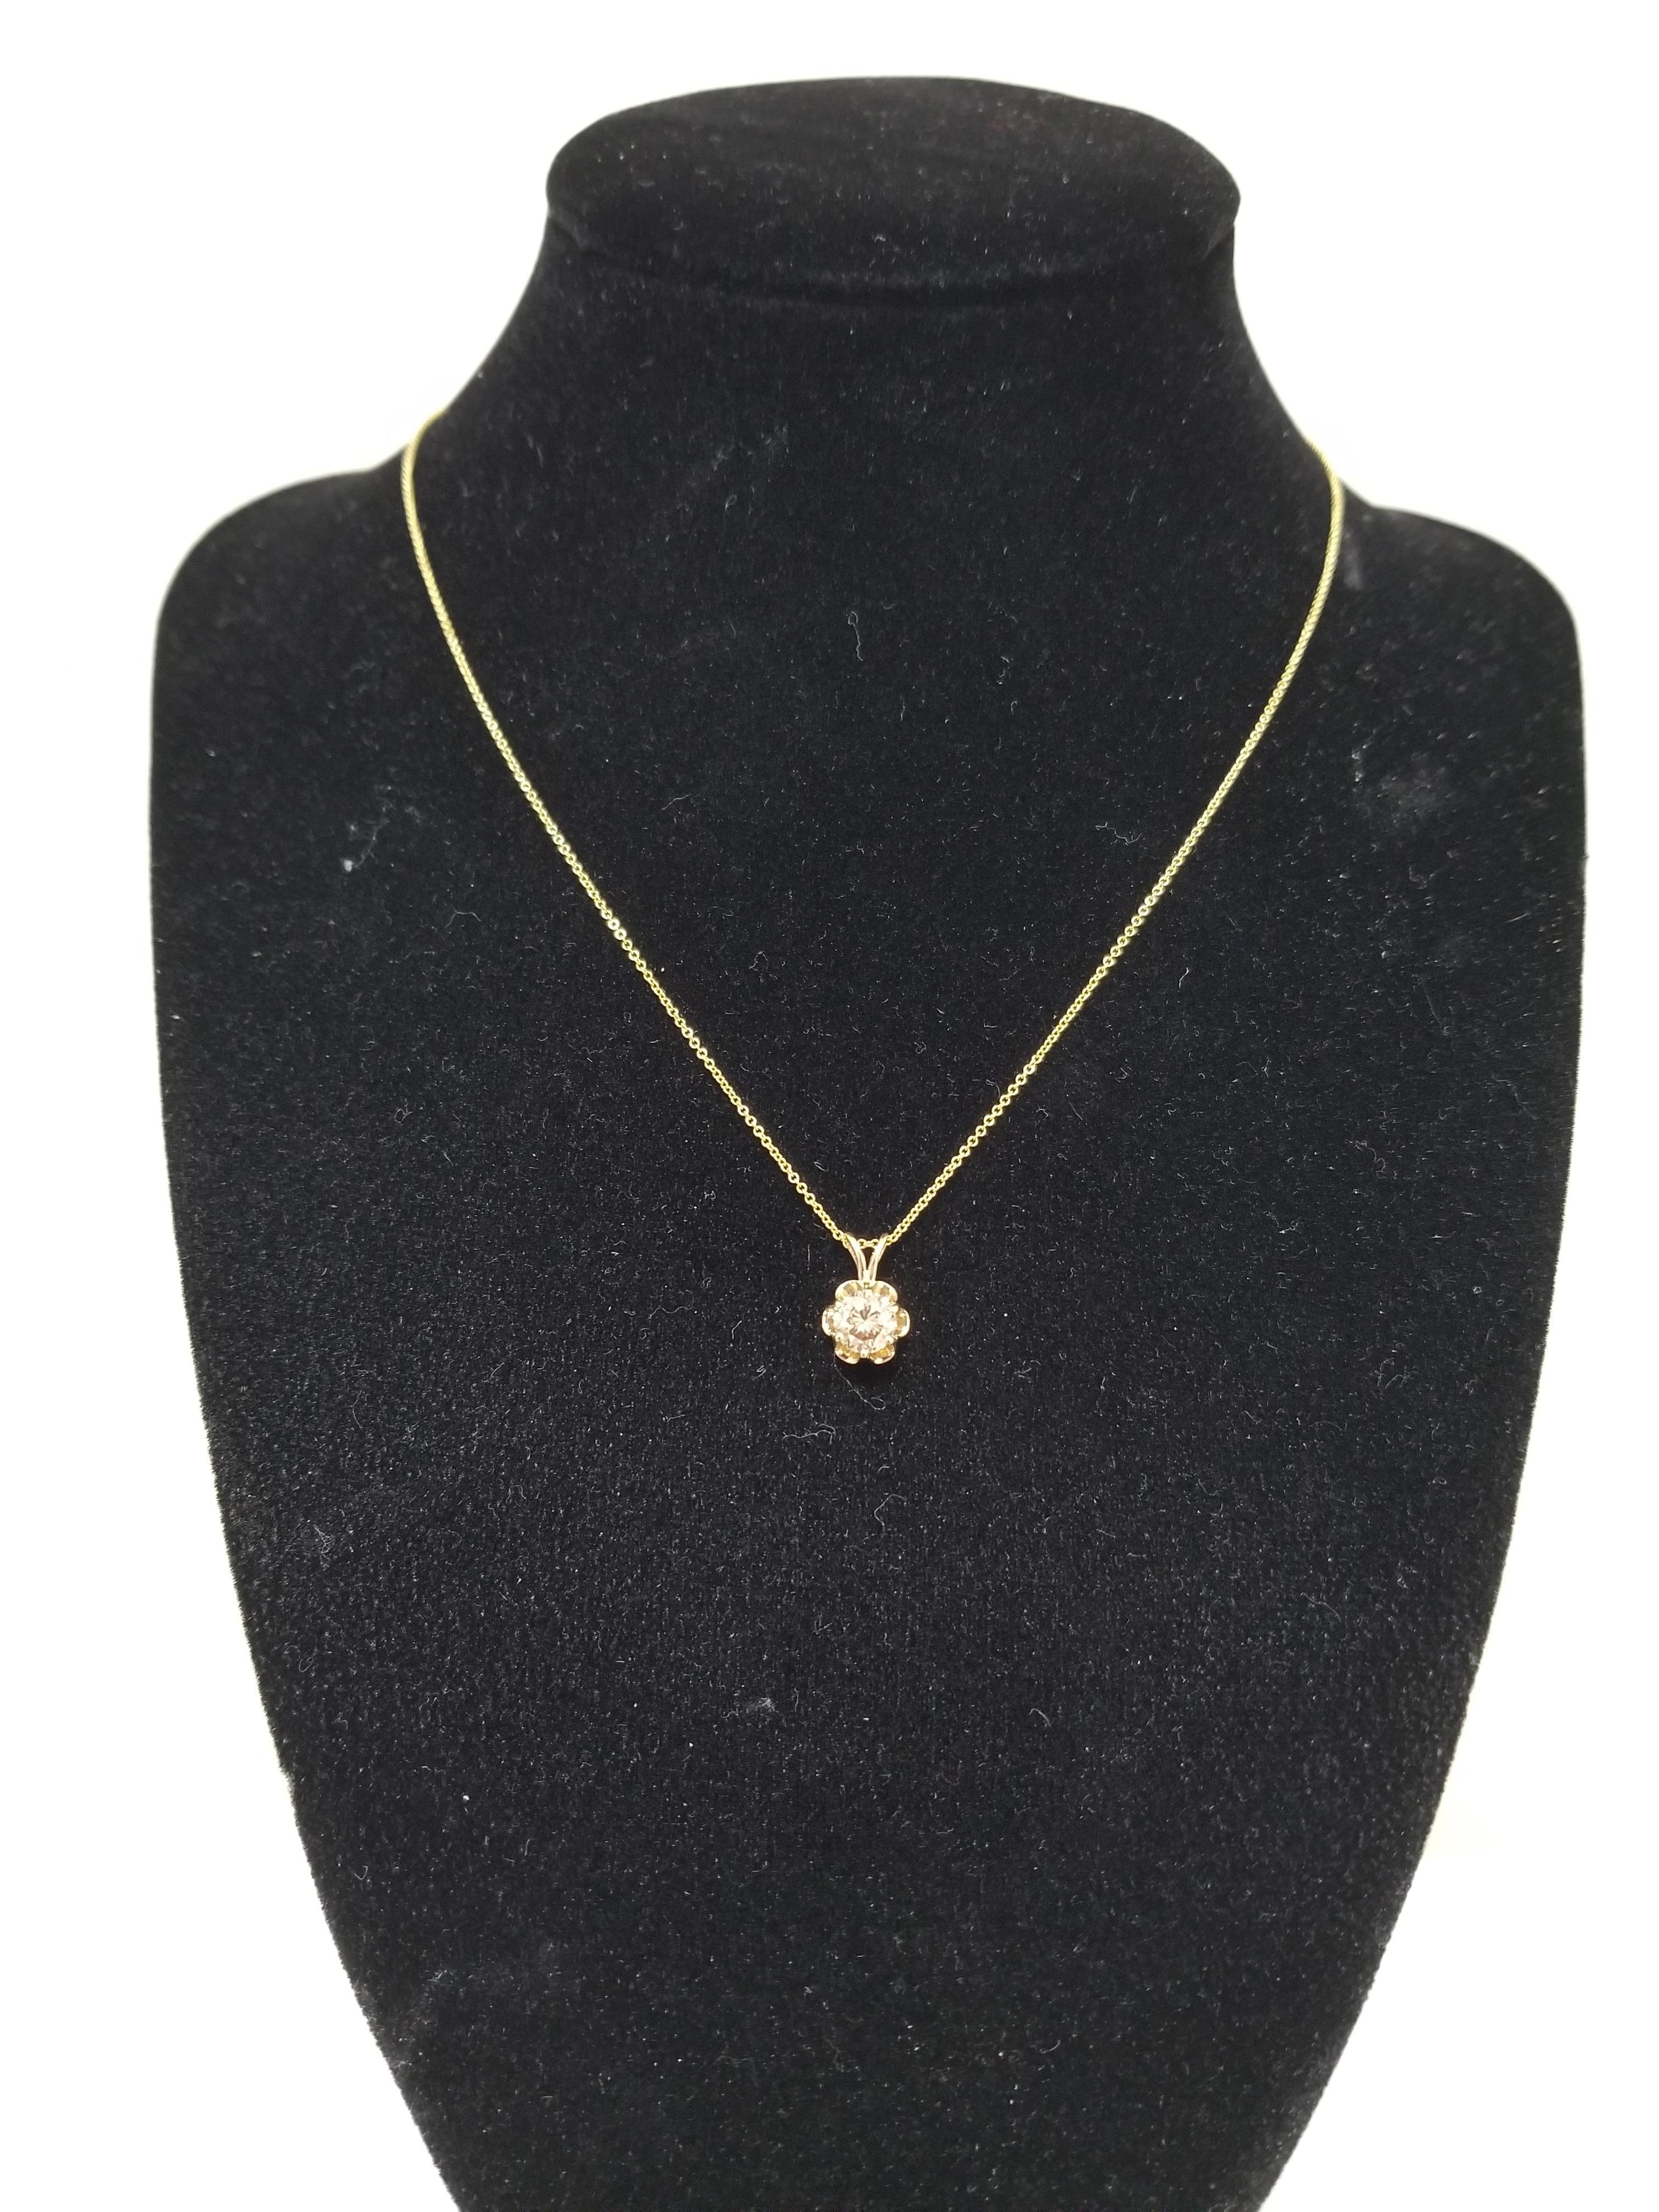 This gorgeous diamond pendant features a 0.78carat GIA round brilliant cut diamond solitaire set in a beautiful 14 karat yellow gold buttercup design. . Pendant measures approximately 0.5 inch length and 0.25 inch wide. 

(Pendant Only - Chain sold